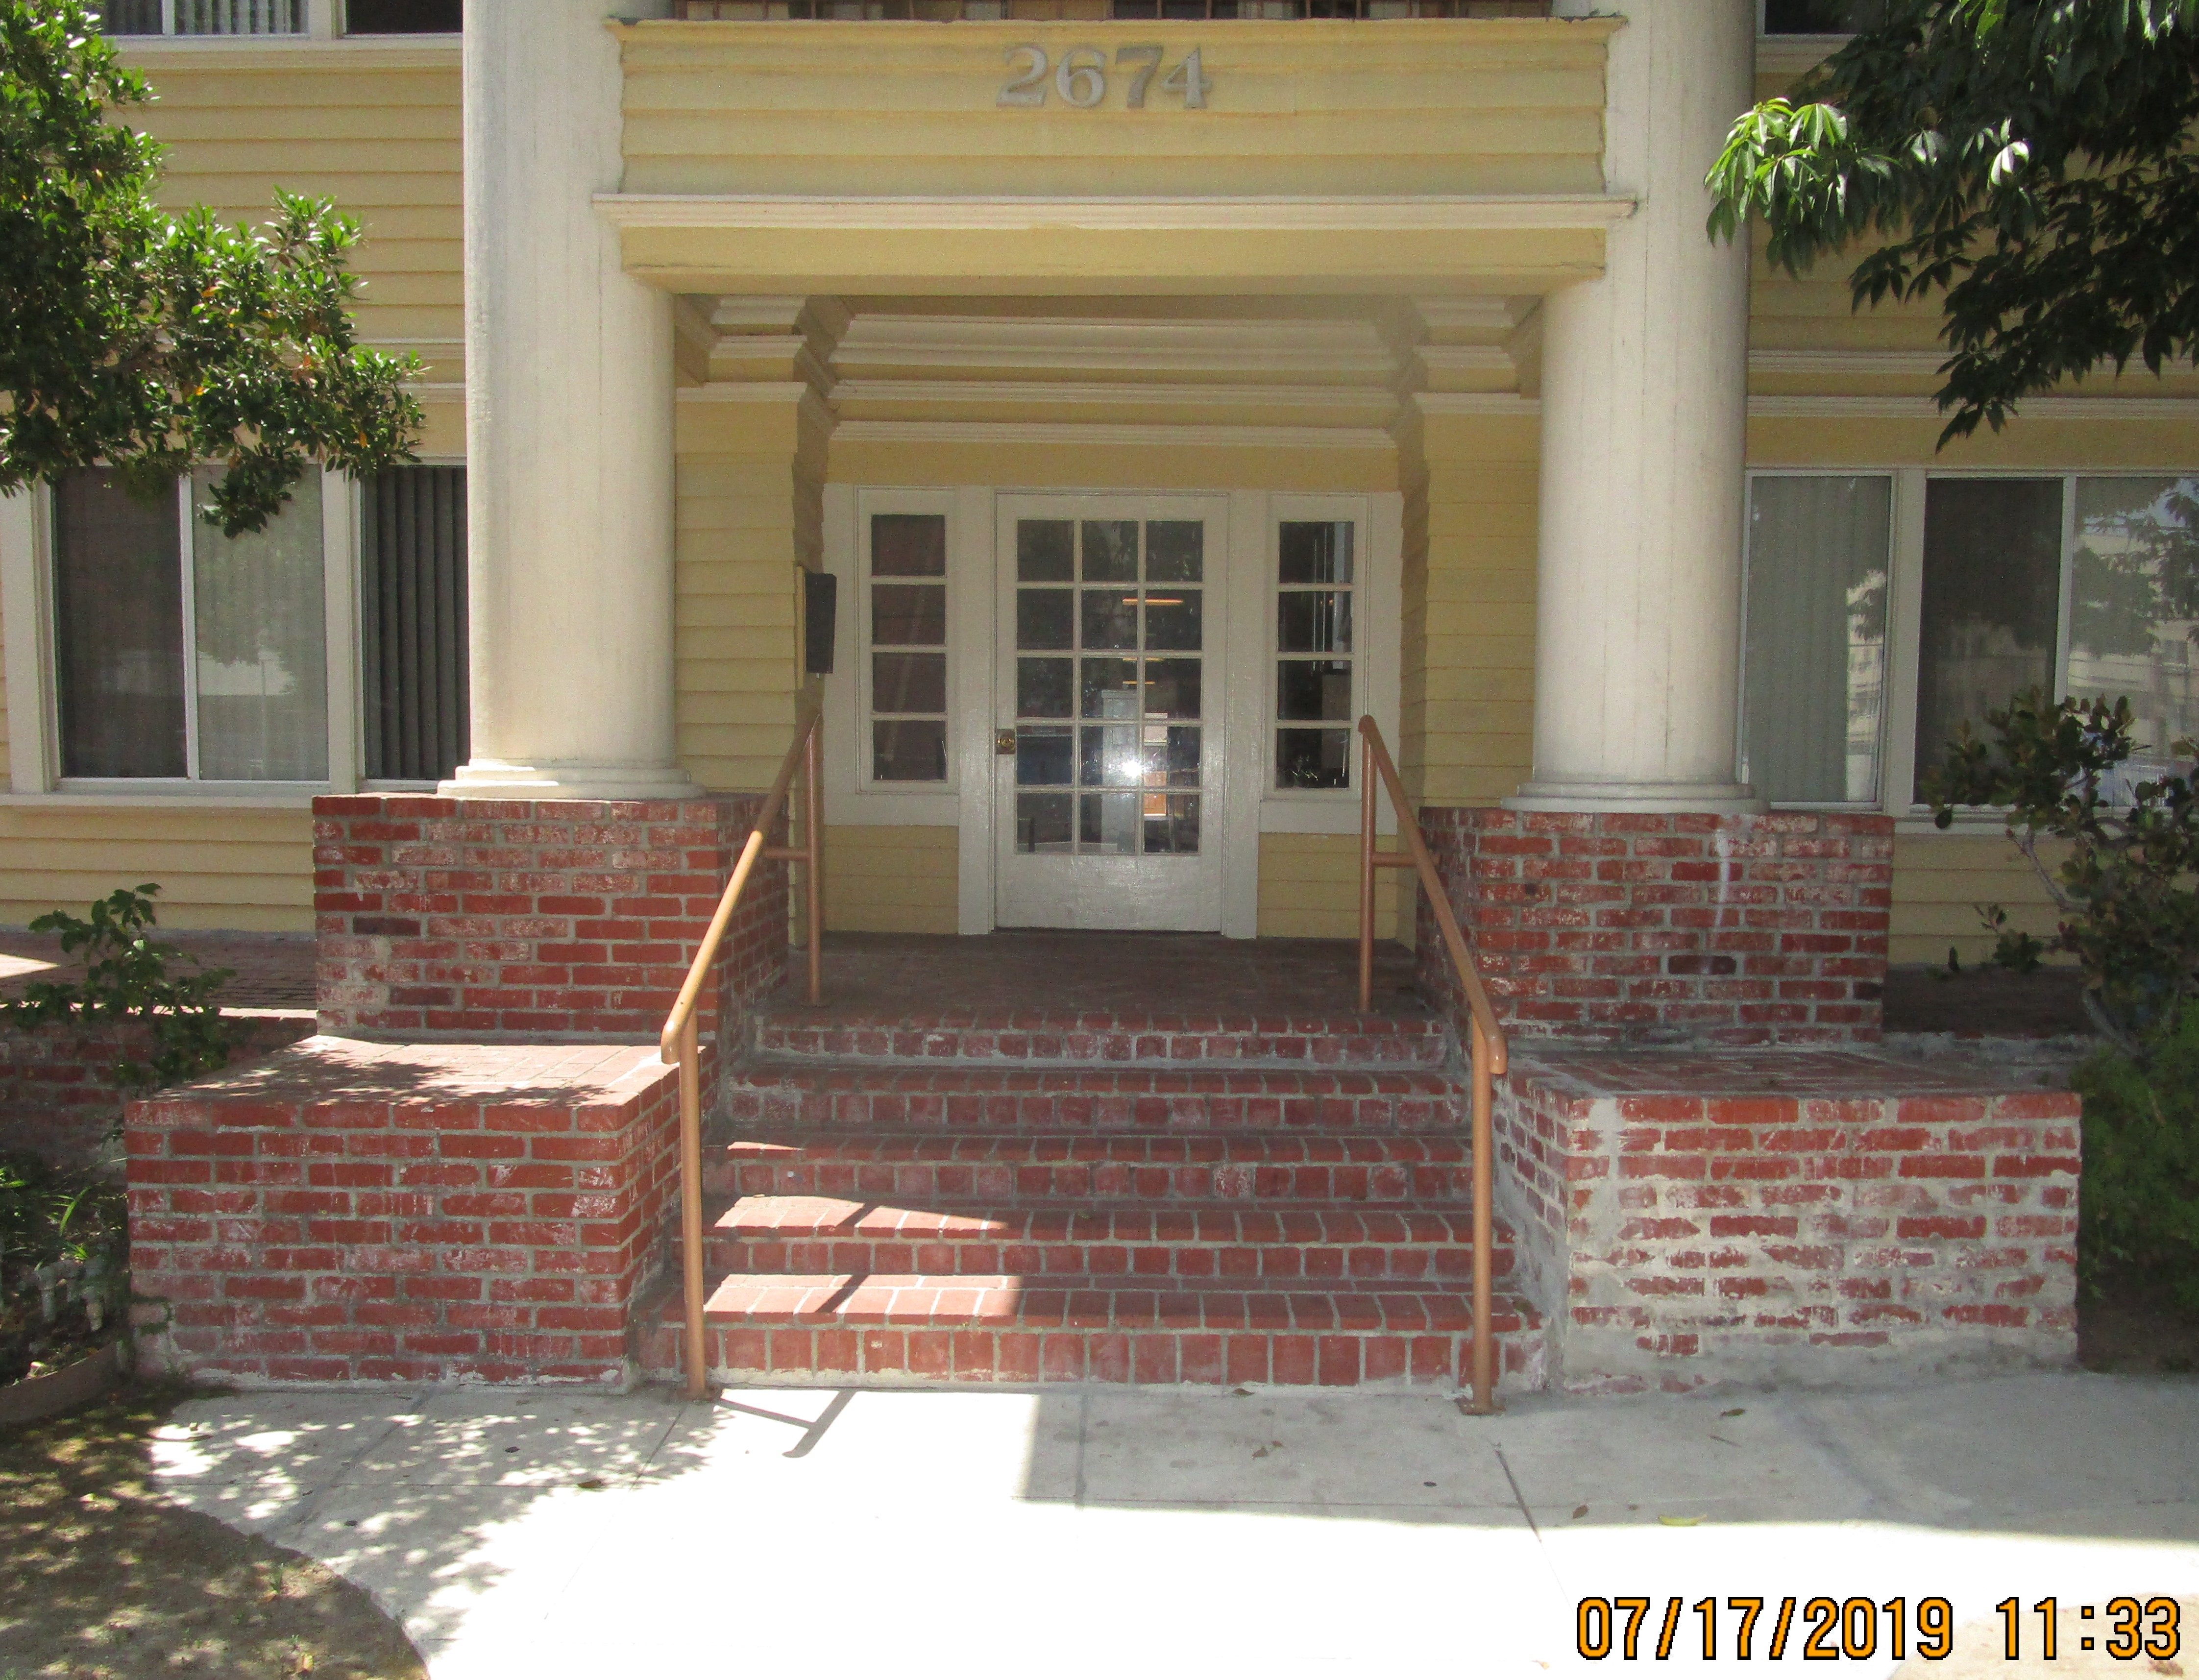 Brick paved front entrance and porch of yellow building with hand rails and two white columns on each side of the steps.